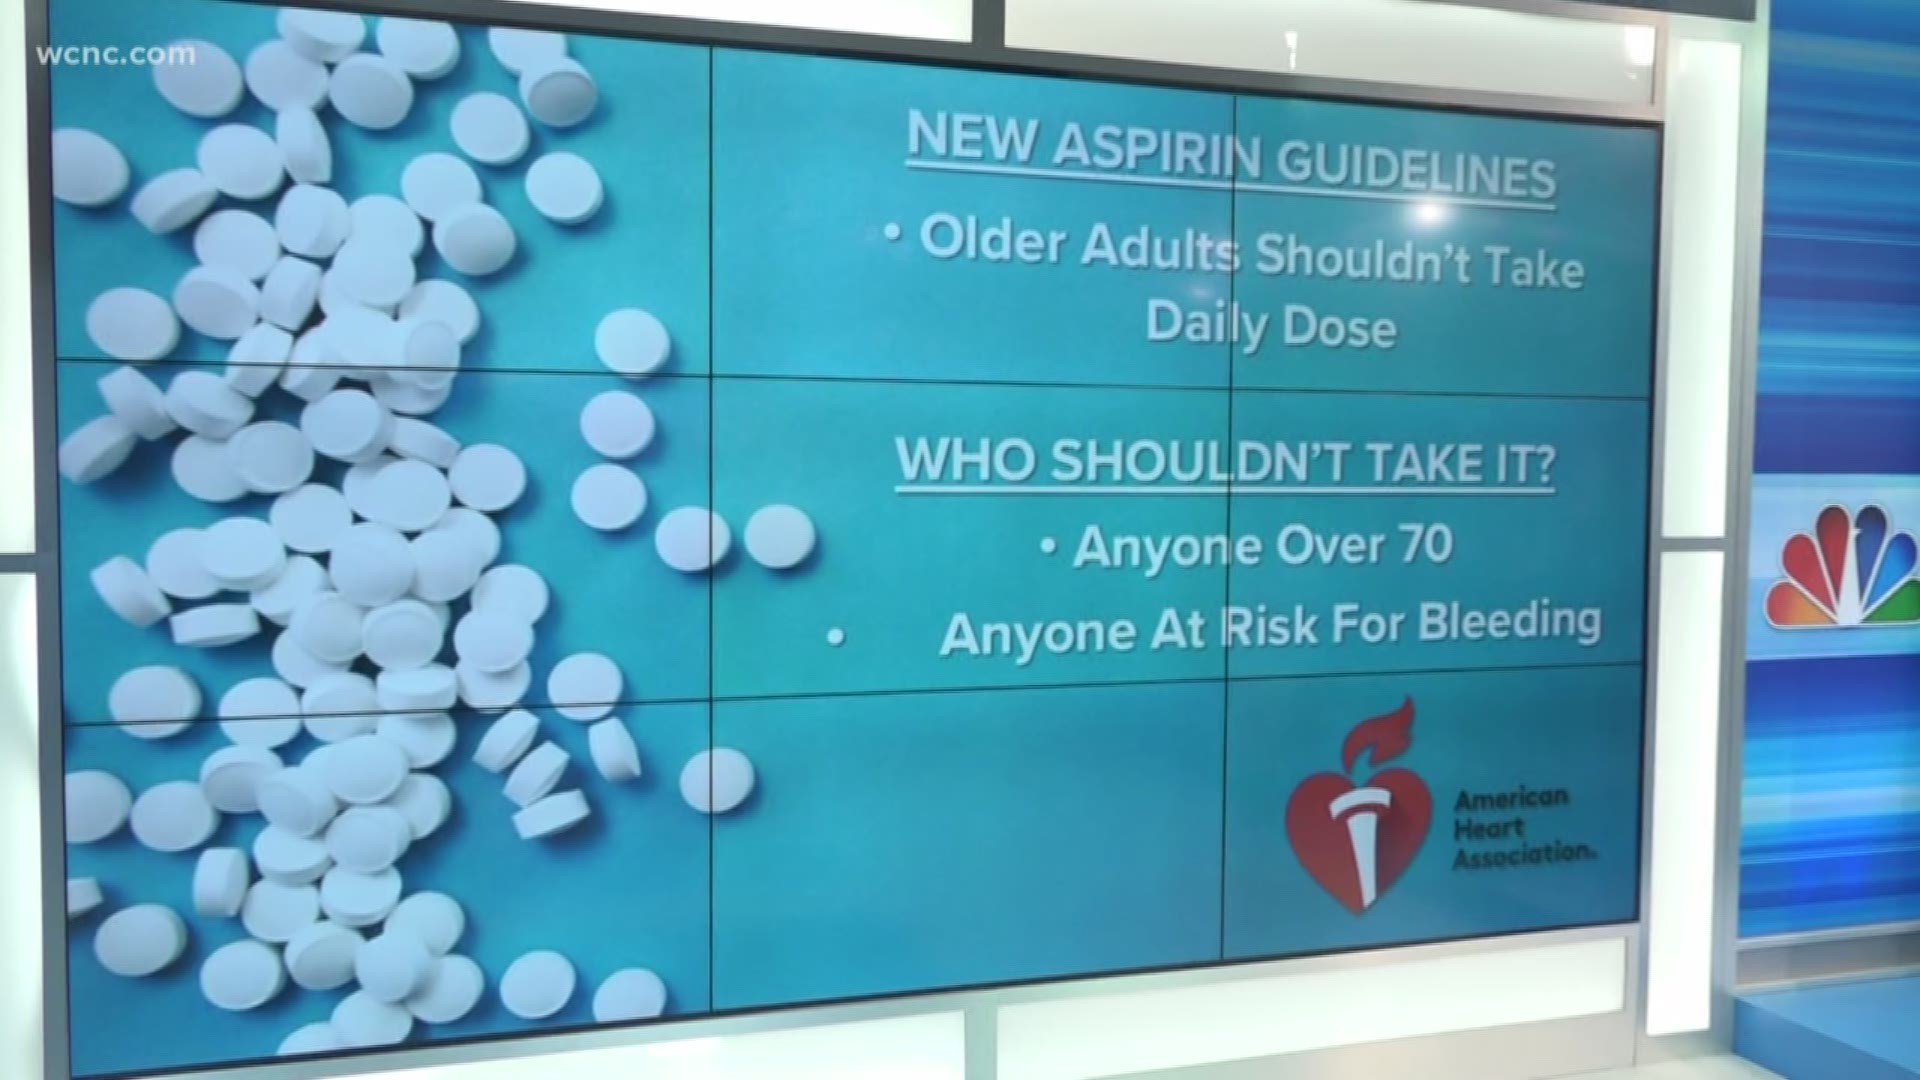 According to new guidelines from the American Heart Association, taking a low-dose aspirin every day to prevent a heart attack or stroke is not recommended for older adults.